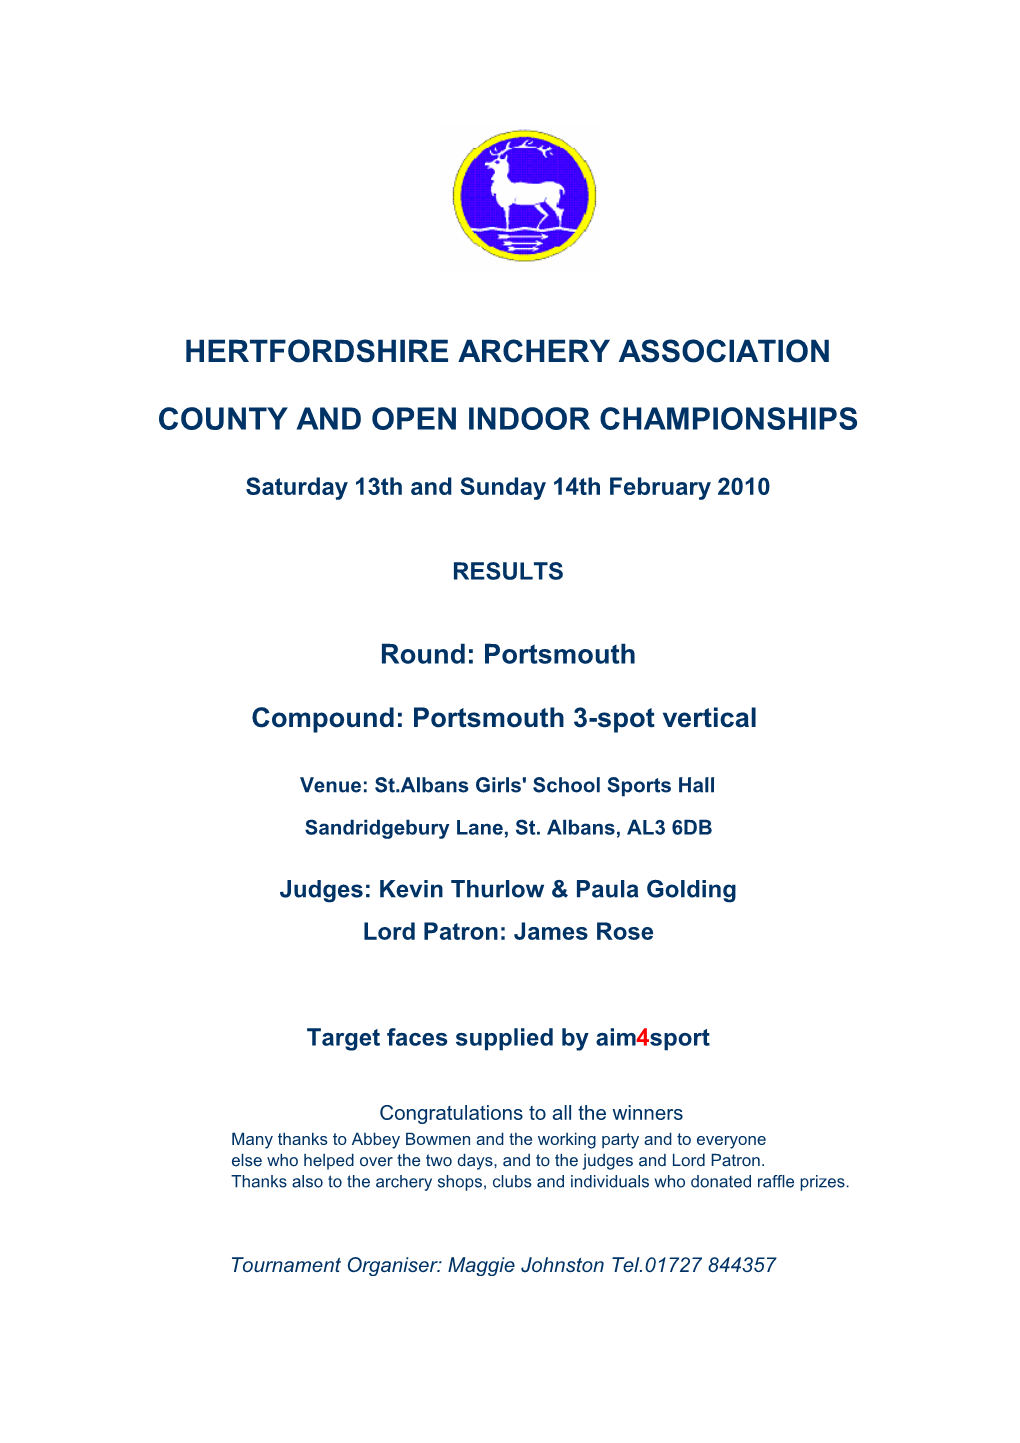 Hertfordshire Archery Association County and Open Indoor Championships